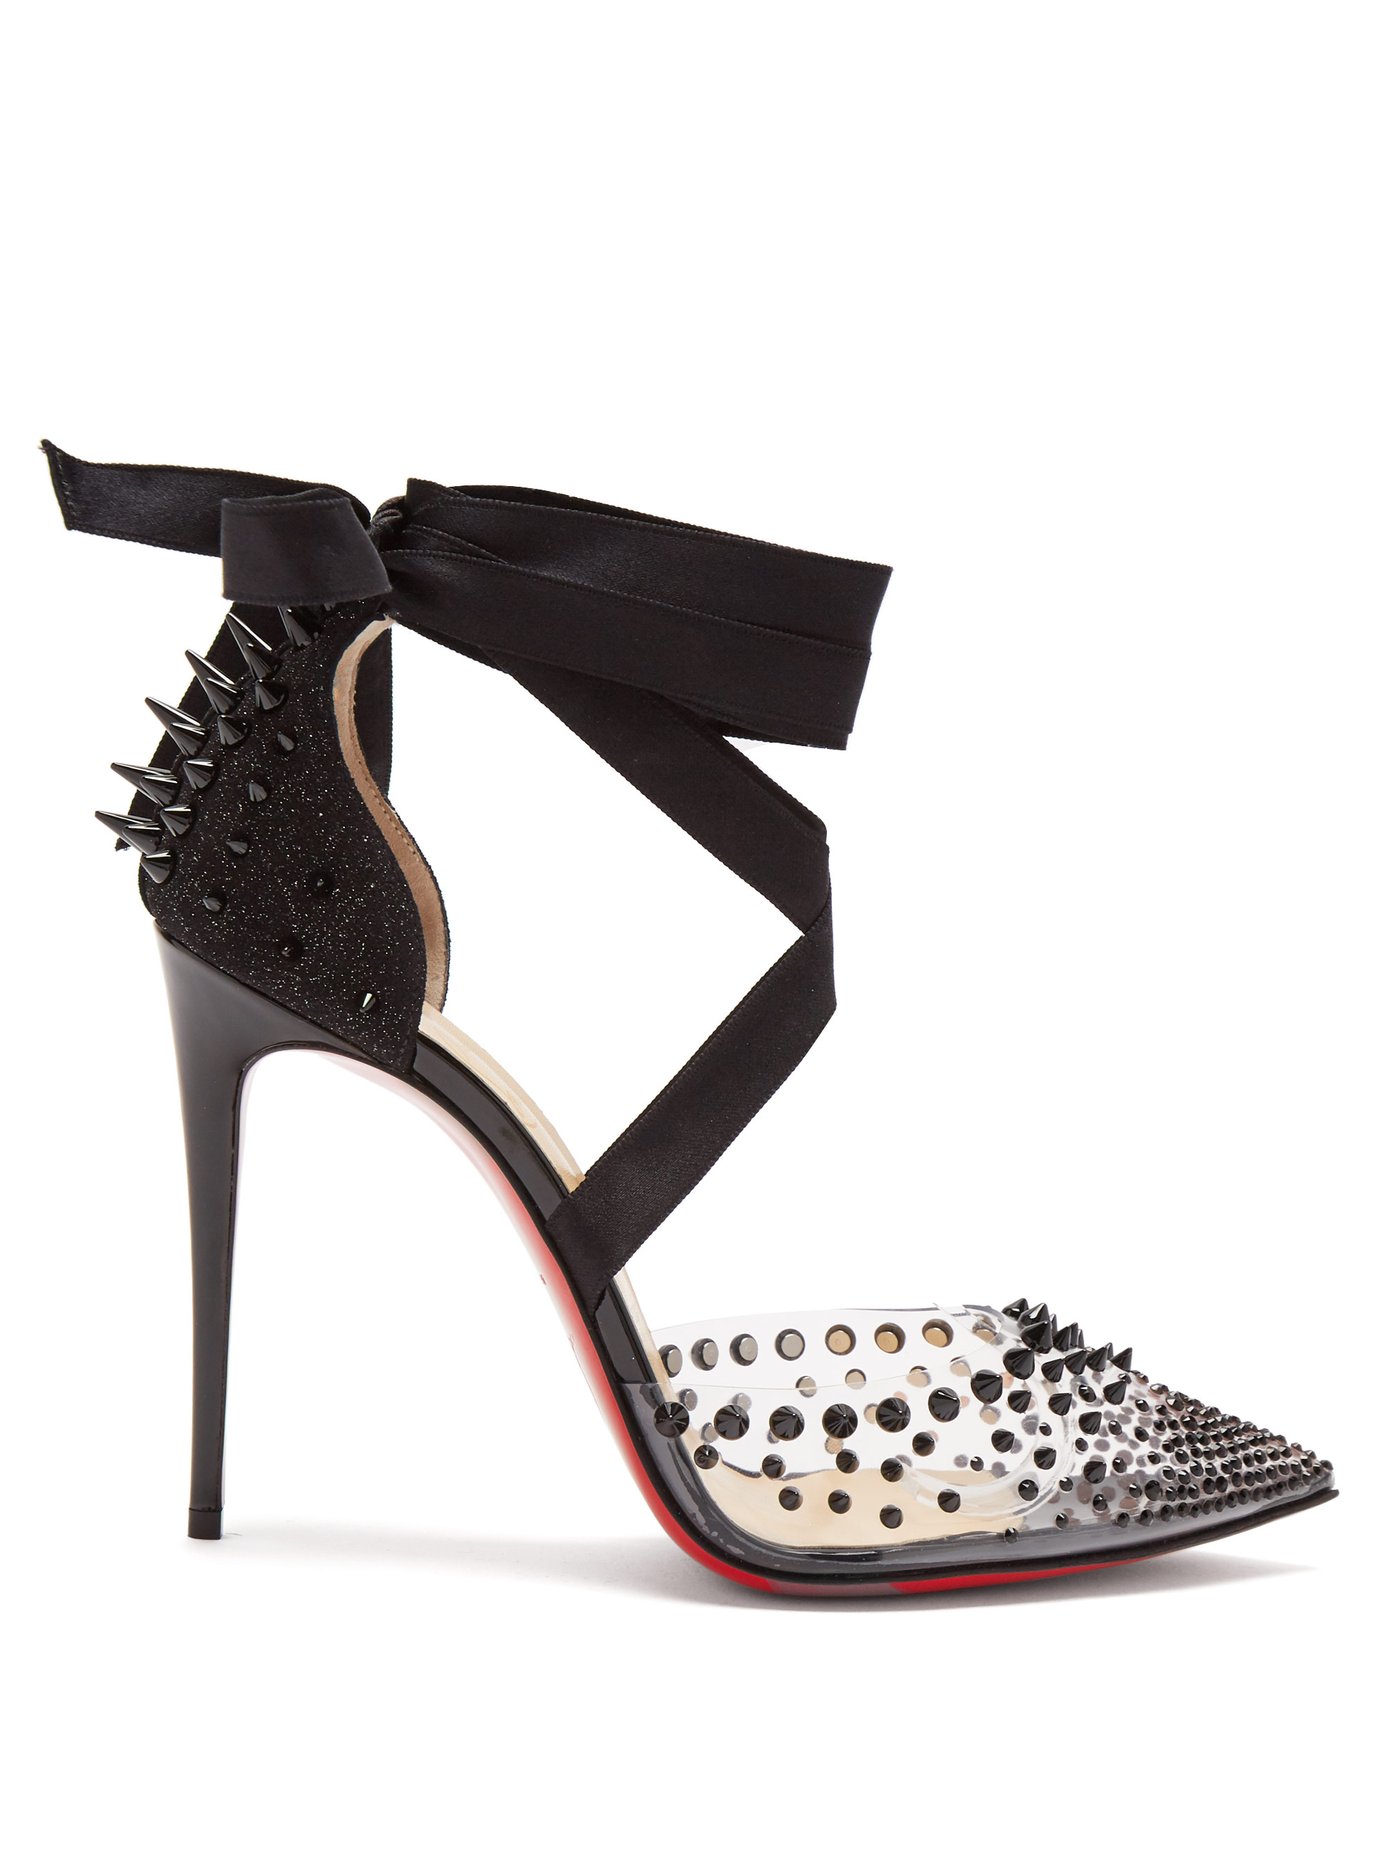 louboutin heels with spikes